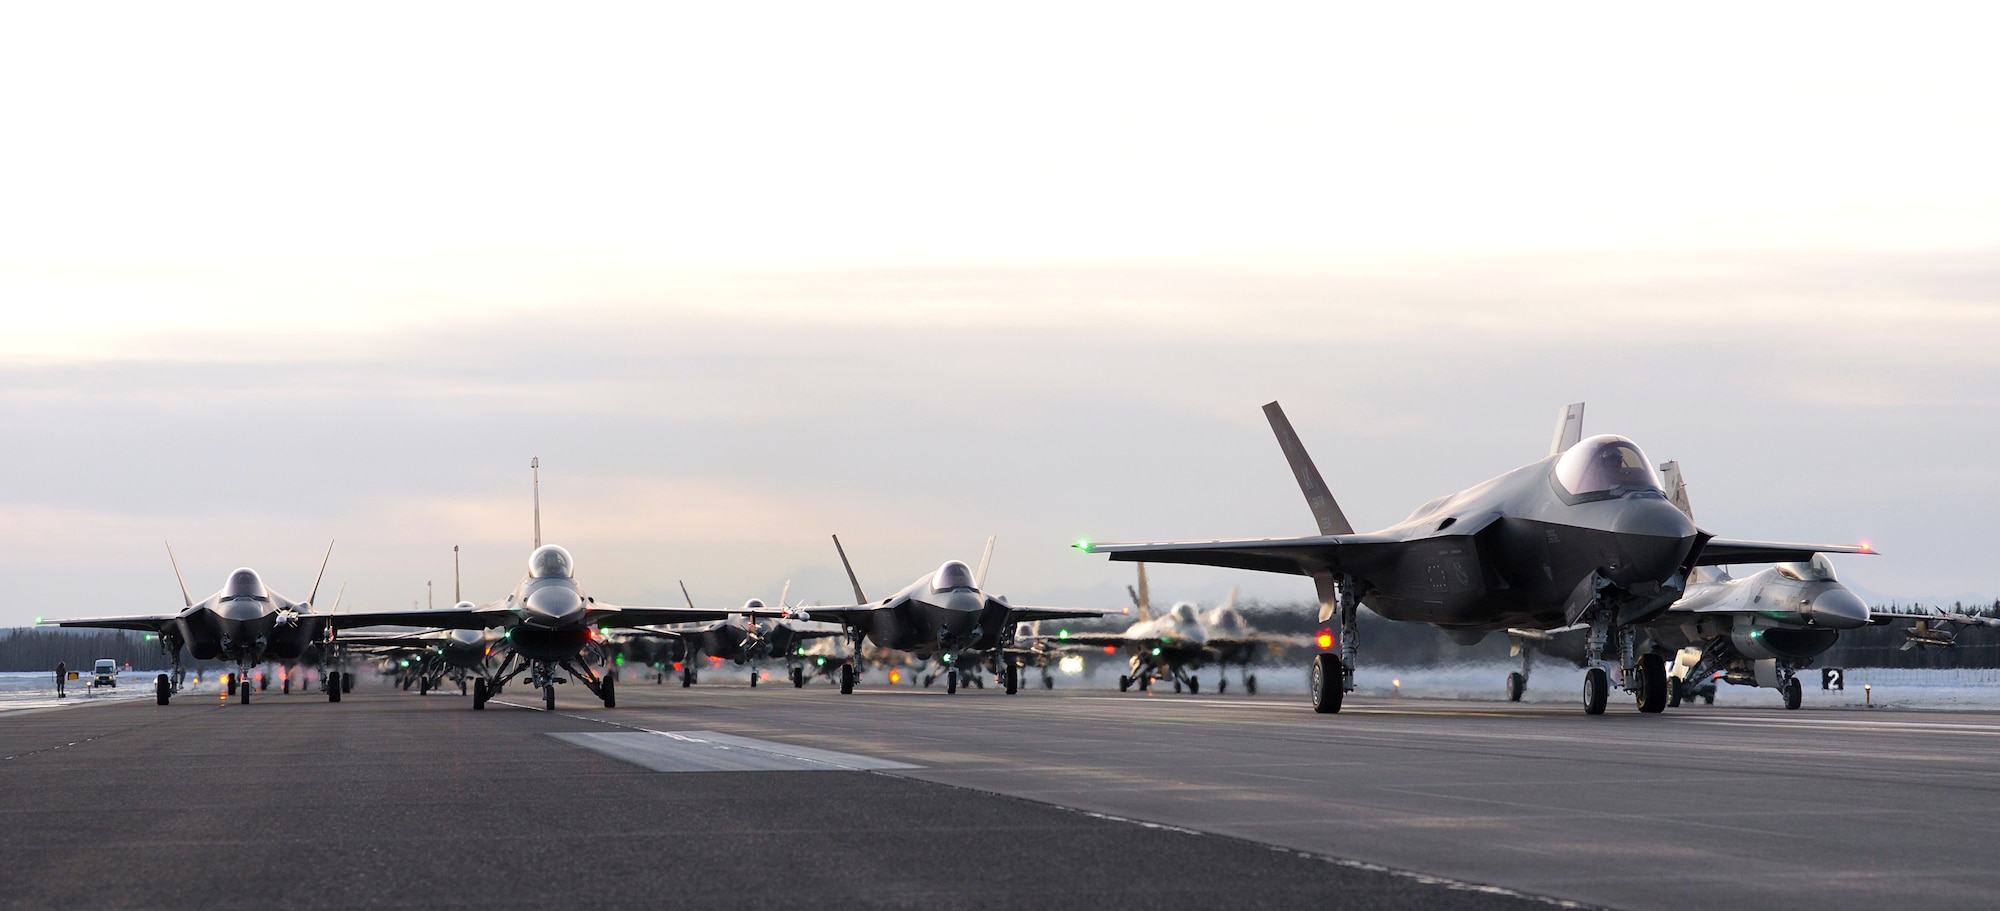 Eighteen U.S. Air Force F-35A Lightning IIs and 12 F-16 Fighting Falcons assigned to the 354th Fighter Wing and two KC-135 Stratotankers assigned to the 168th Wing form an elephant walk on Eielson Air Force Base, Alaska, Dec. 18, 2020.